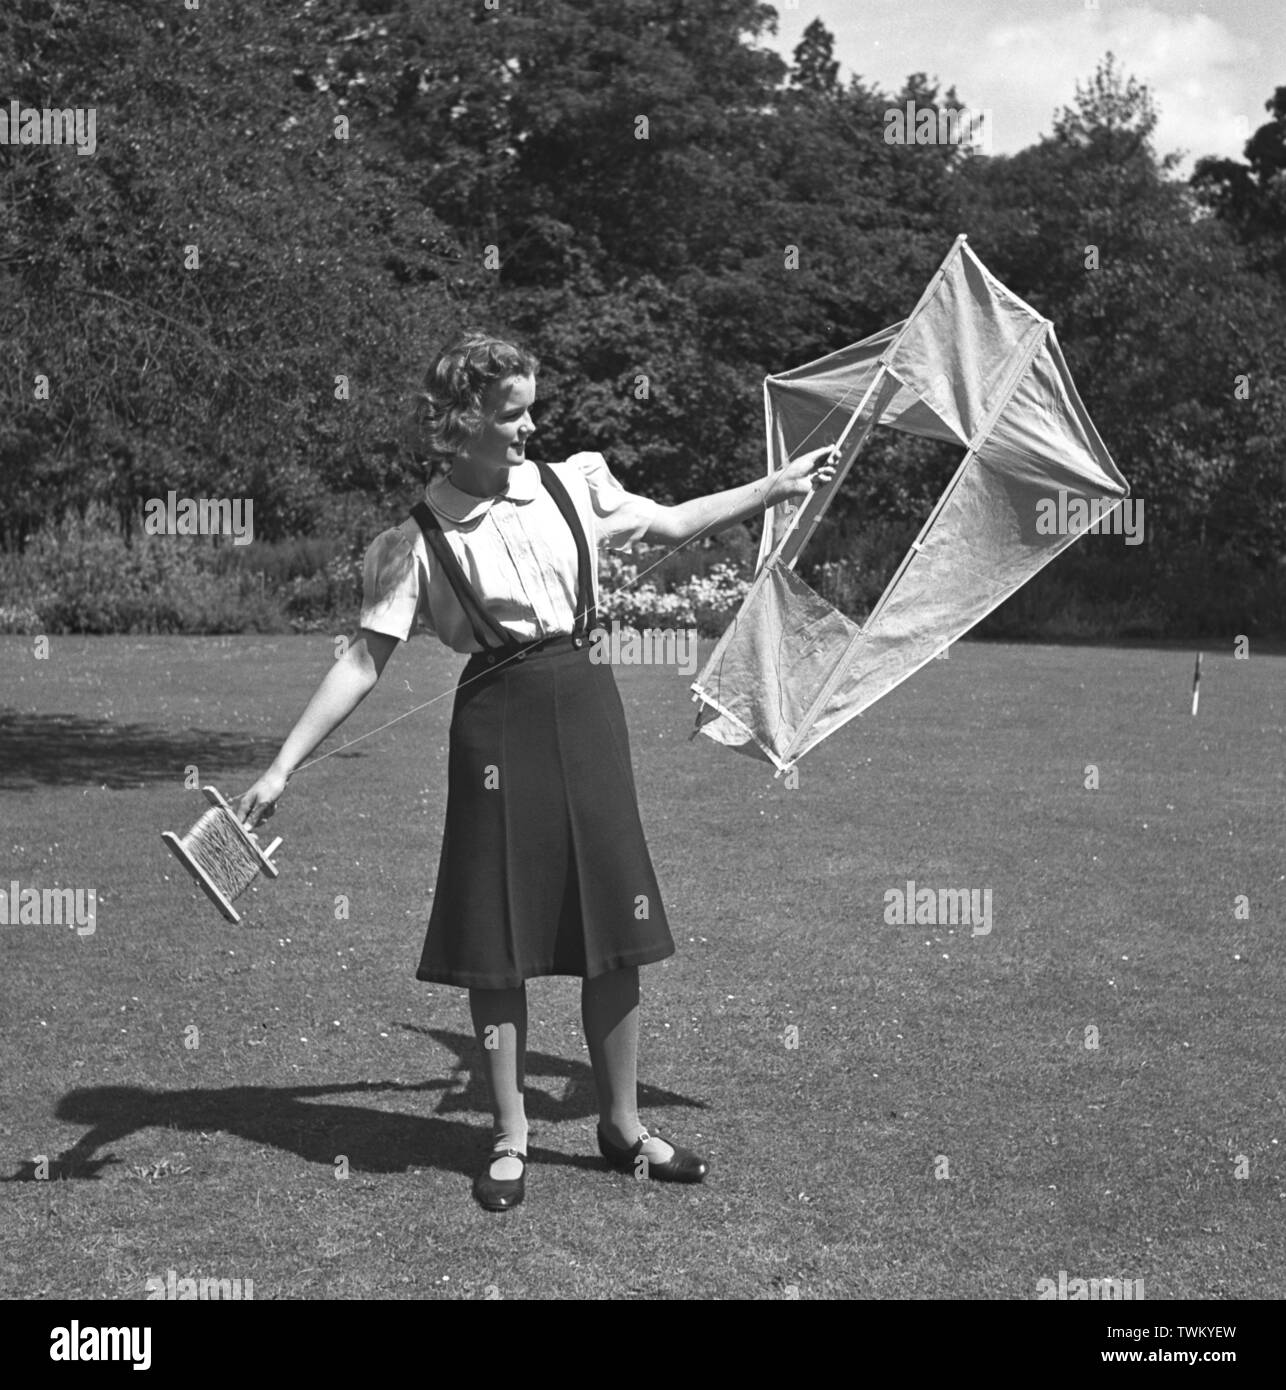 A teenage girl posing with a box kite on a croquet lawn c1948. Photo by Gilbert Adams    From The Gilbert Adams Collection of work owned by Tony Henshaw Stock Photo